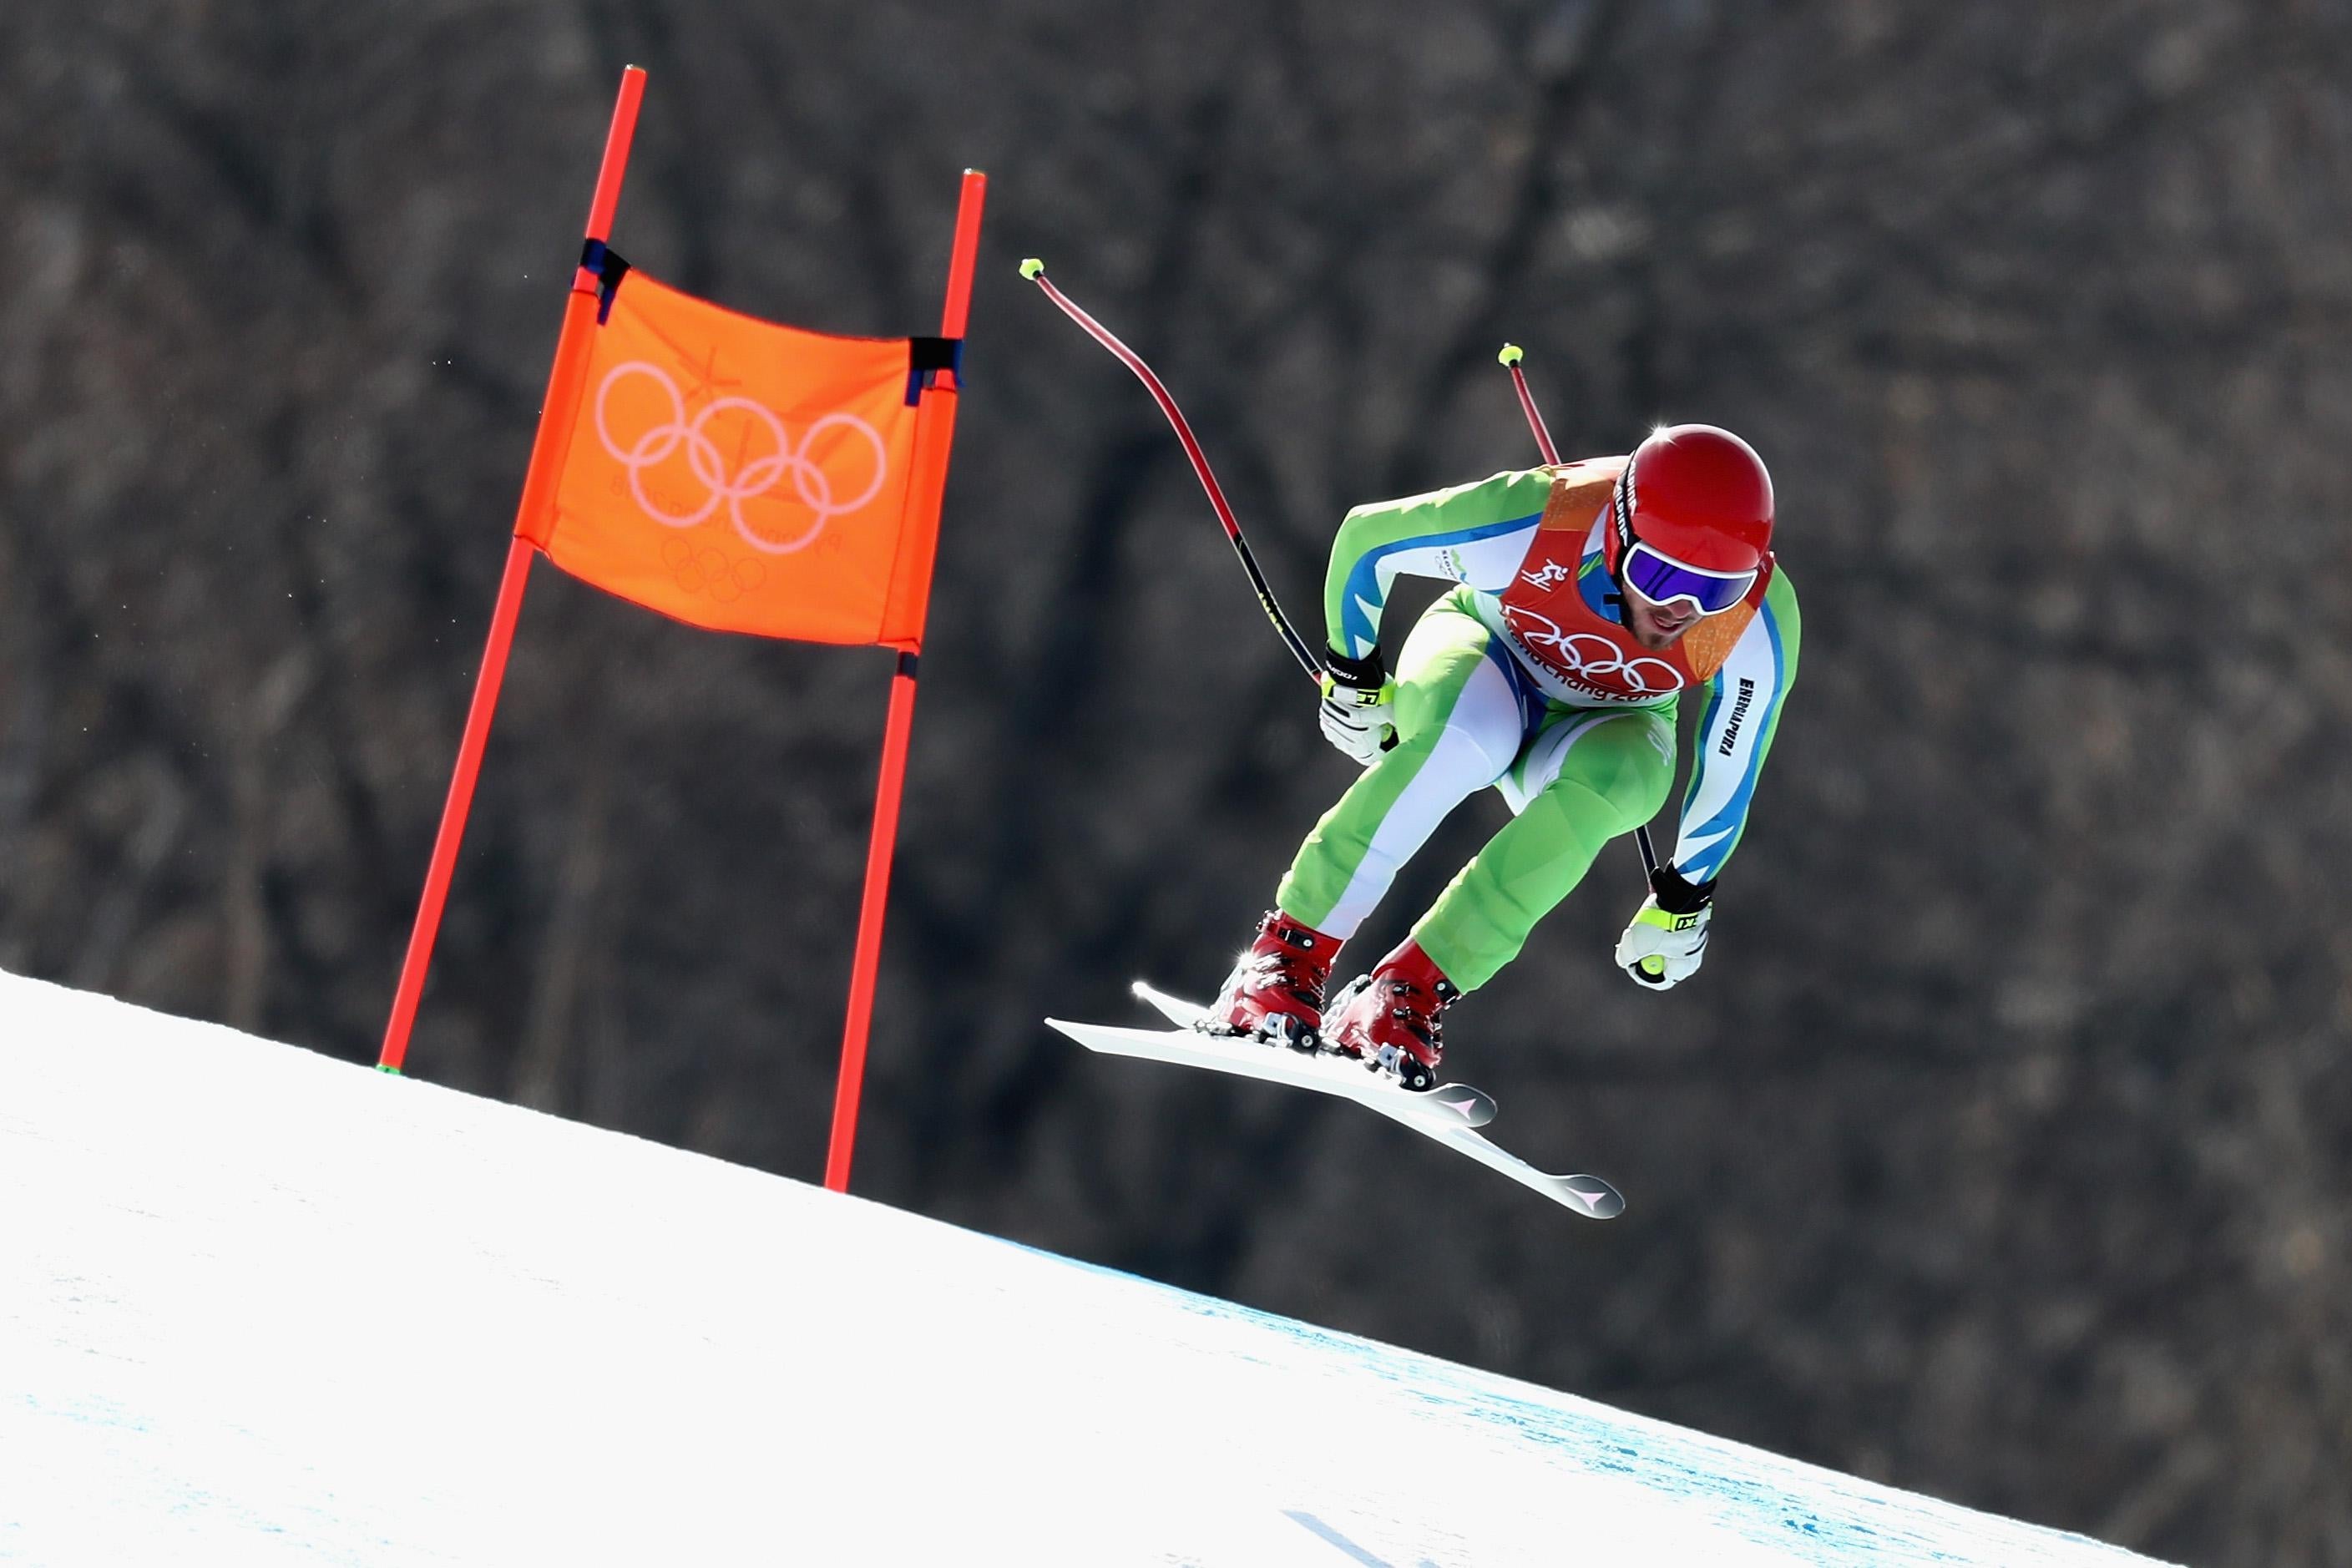 PYEONGCHANG-GUN, SOUTH KOREA - FEBRUARY 15:  Miha Hrobat of Slovenia makes a run during the Men's Downhill on day six of the PyeongChang 2018 Winter Olympic Games at Jeongseon Alpine Centre on February 15, 2018 in Pyeongchang-gun, South Korea.  (Photo by Al Bello/Getty Images)